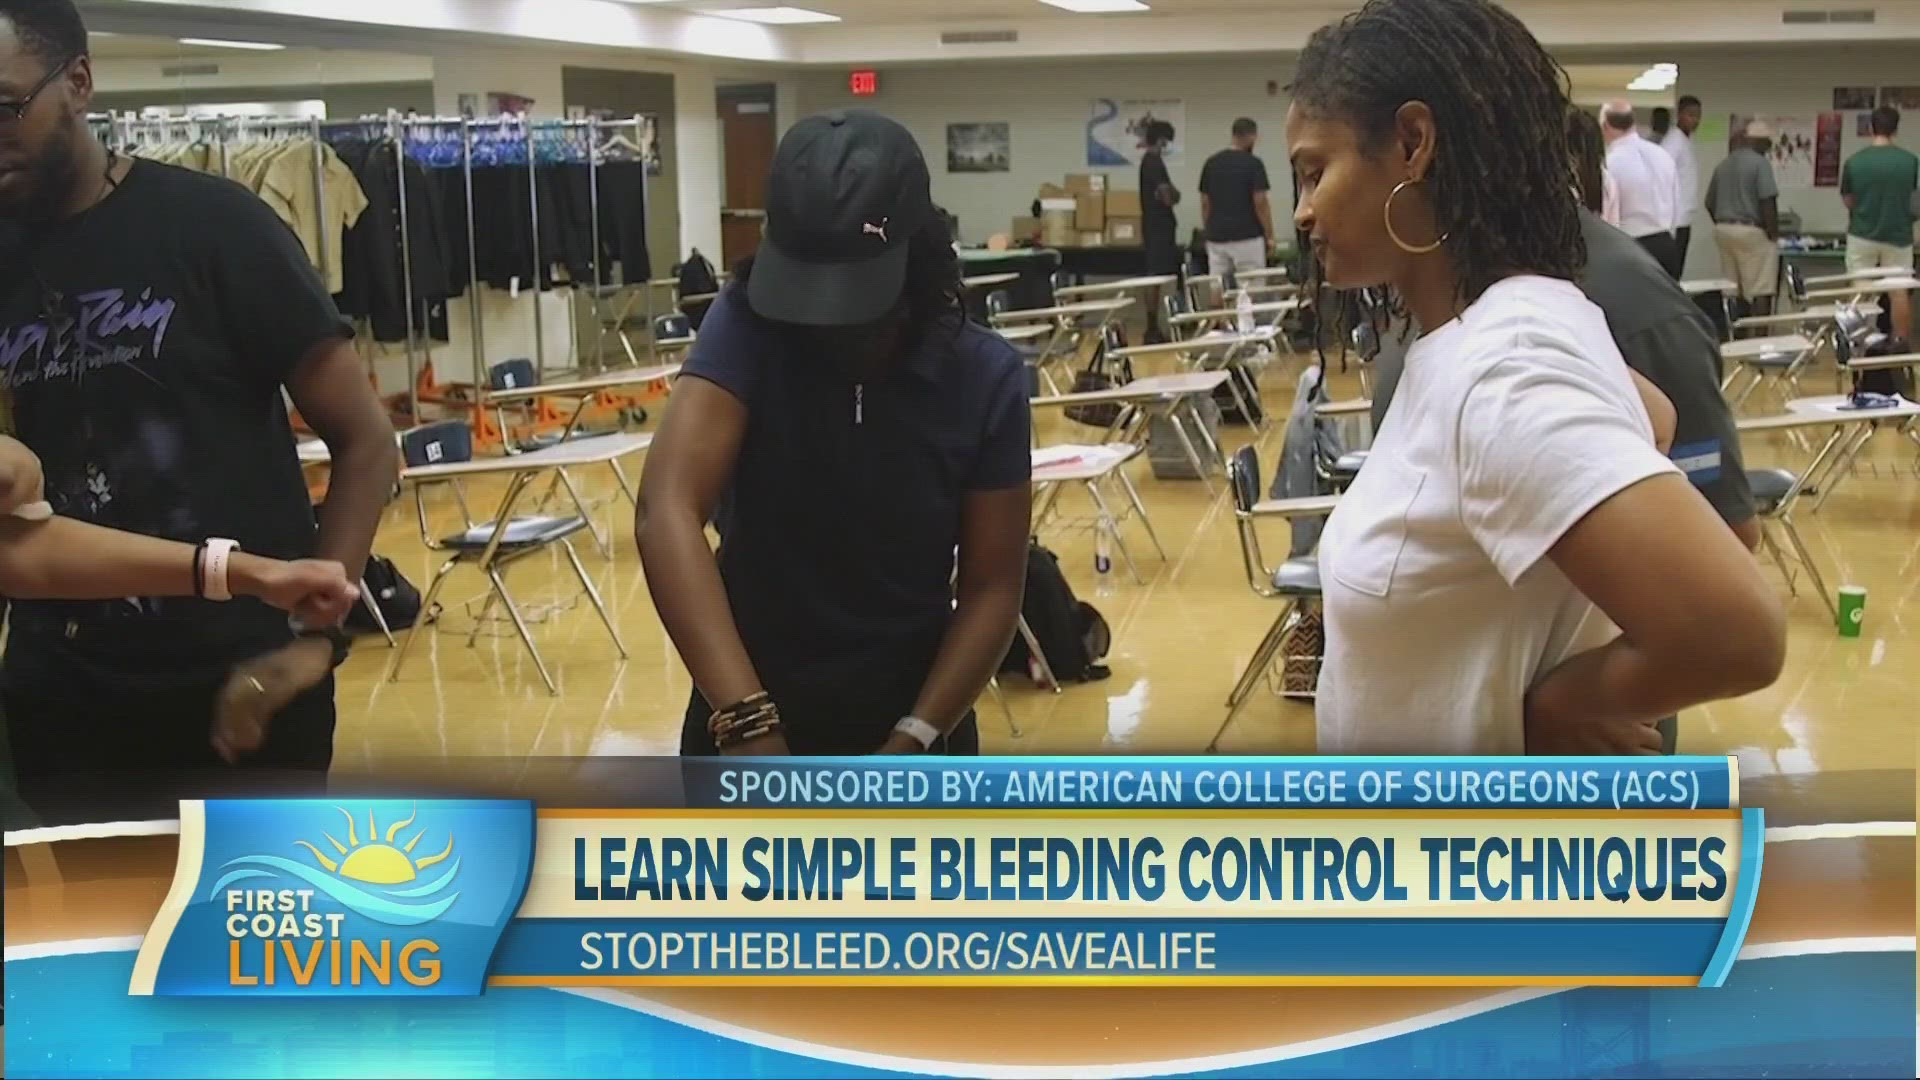 STOP THE BLEED®, a program that empowers any individual to help control bleeding injuries until help arrives, involves three simple steps after calling 911.